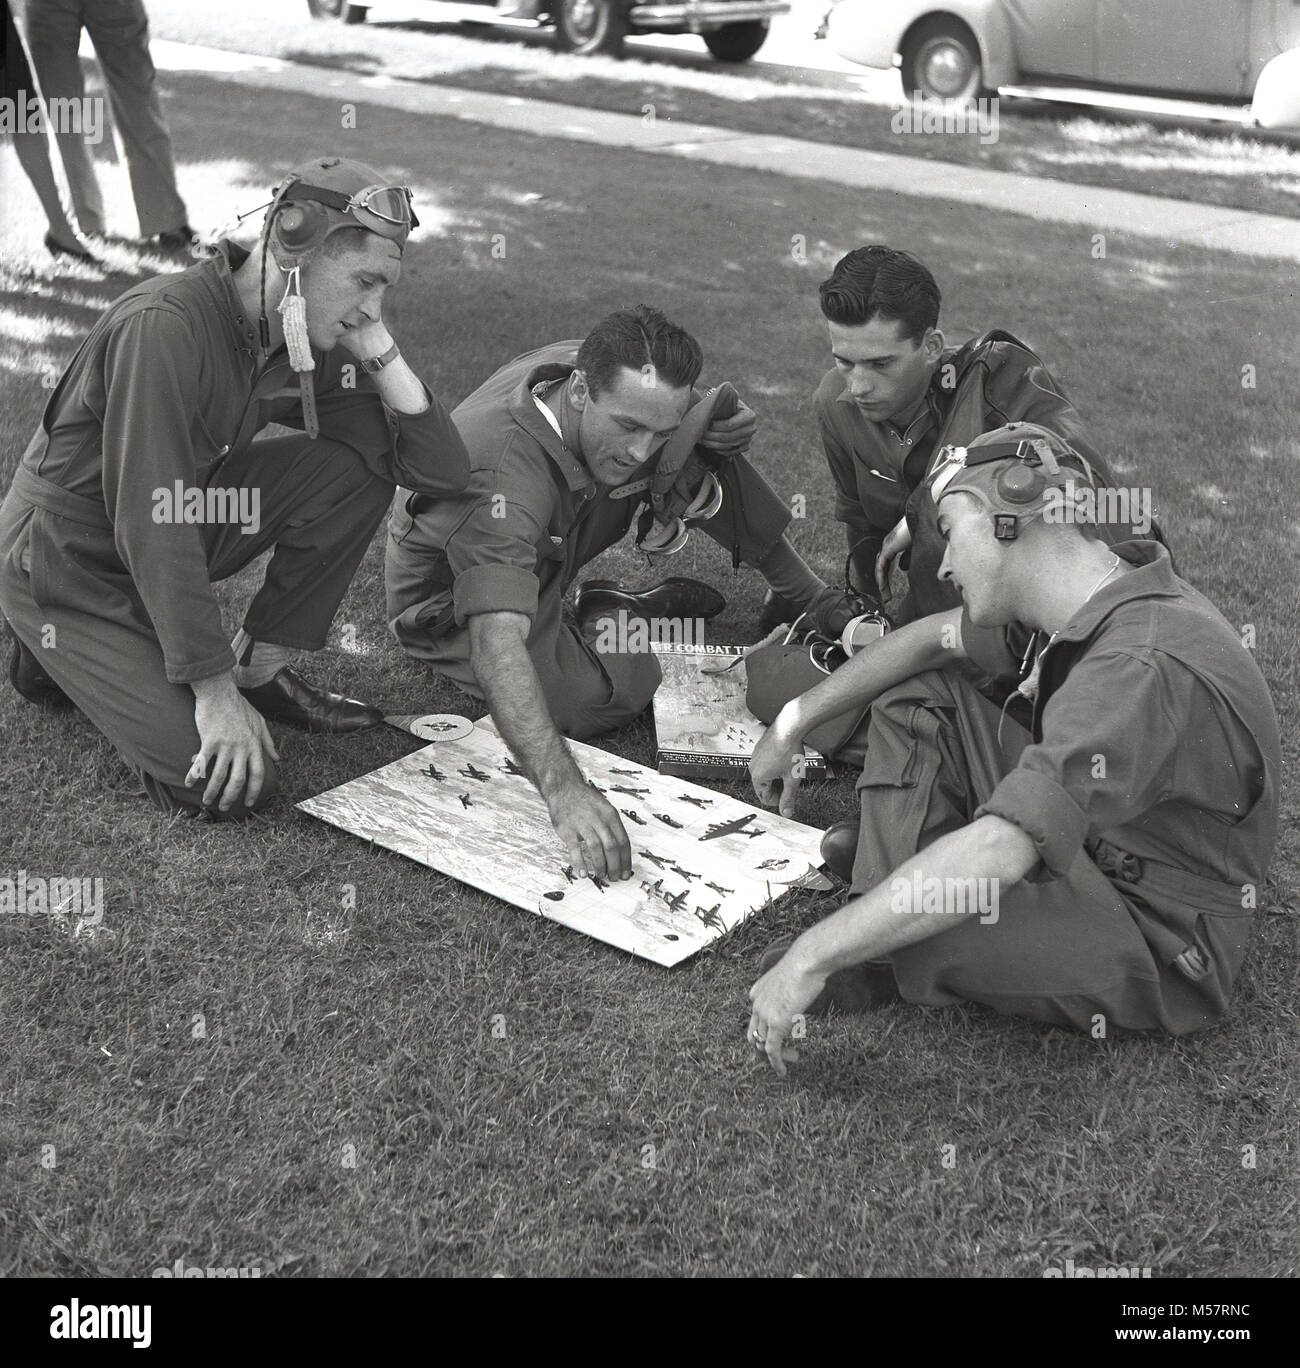 1942, USA, historical, four servicemen of the United States Army Air Forces (USAAF) wearing their flying kit sitting on a grass verge outside playing the new board game, 'Air Combat Trainer'. Produced in conjunction with the US War Department, the game was a test of skill at combat flying, using miniatures of war planes and combat manoeuvres. Stock Photo